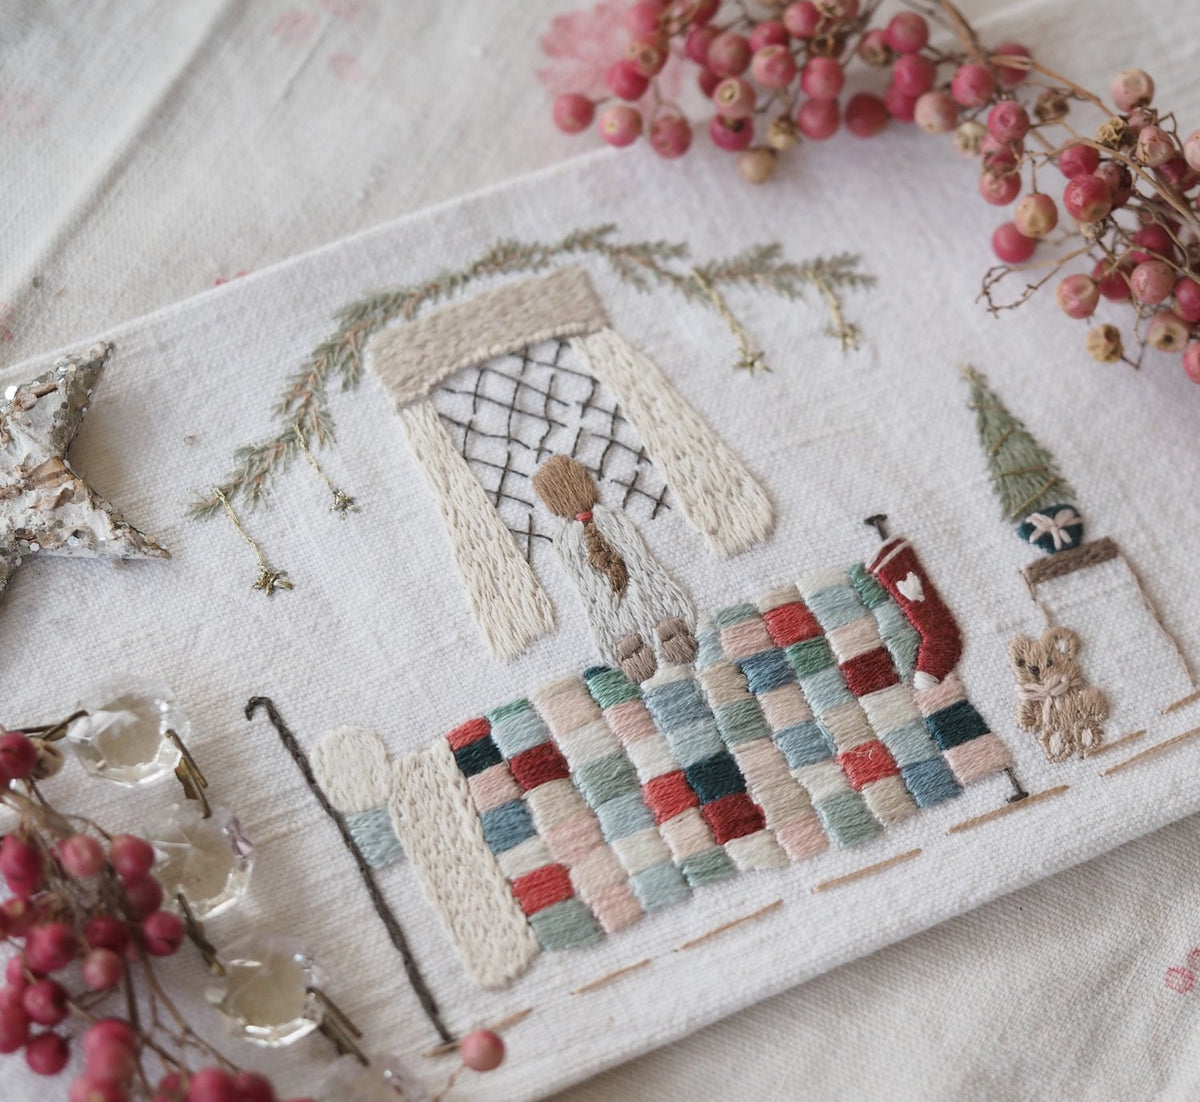 The Stitchery Embroidery Kit: The Night Before Christmas